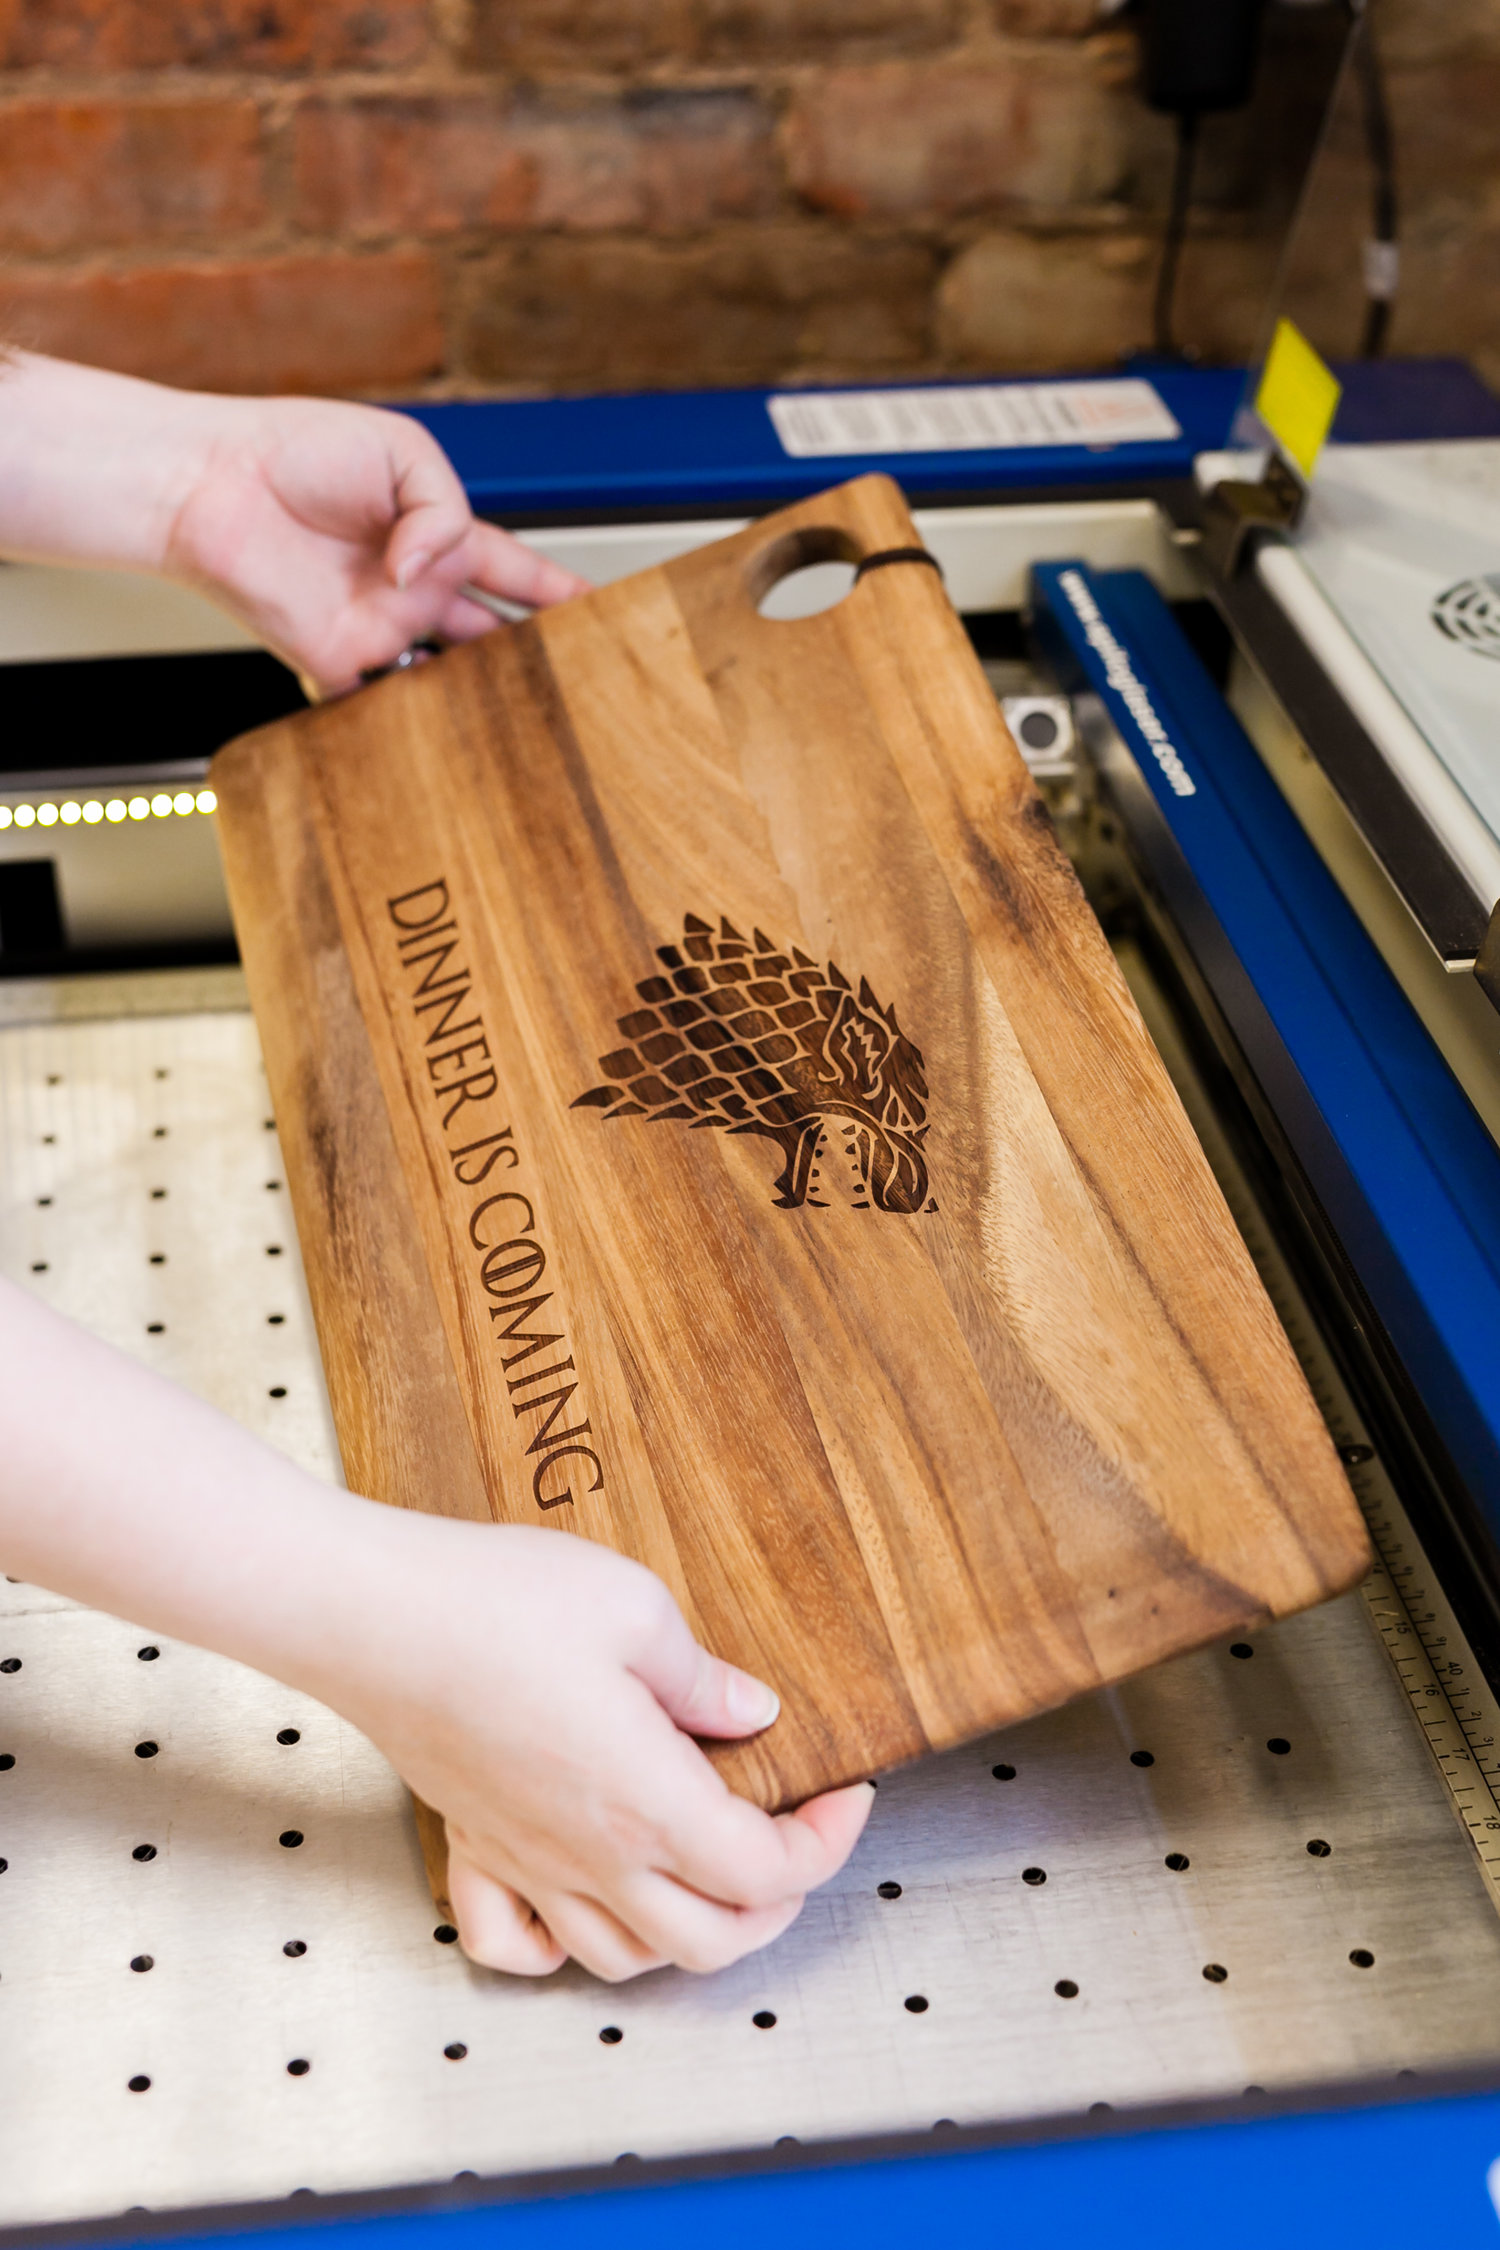 WUDN Wholesale Wooden Promotional Products: The (mostly) Complete Guide to Laser  Engraving Wooden Promotional Products (and some tips)